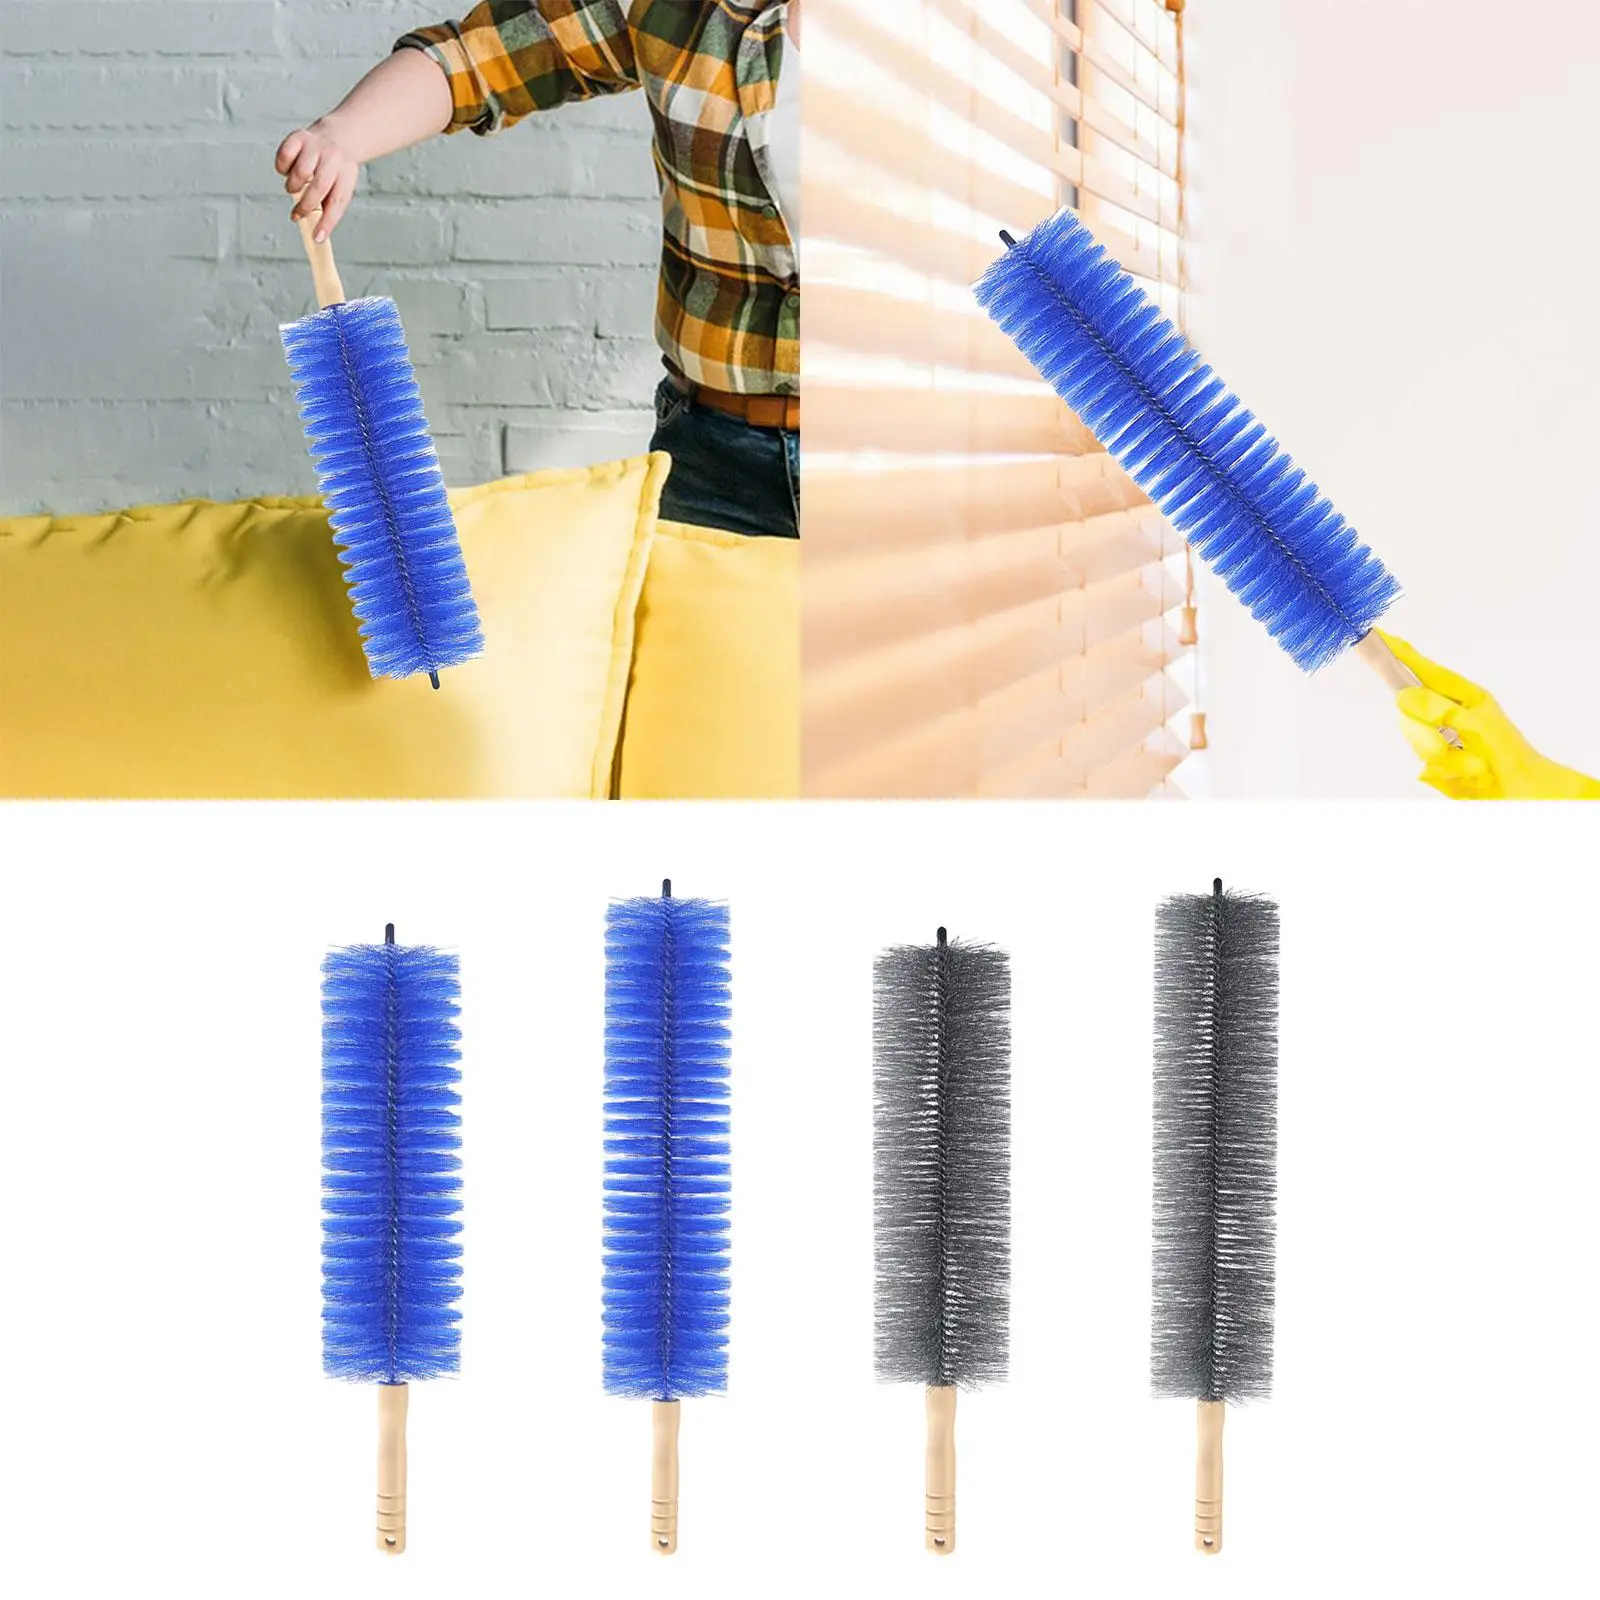 Hand Dust Cleaner Portable Dust Crumb Remover Dust Cleaning Brush for Ceiling Fan Furniture Car Home Electrical Dust Removal